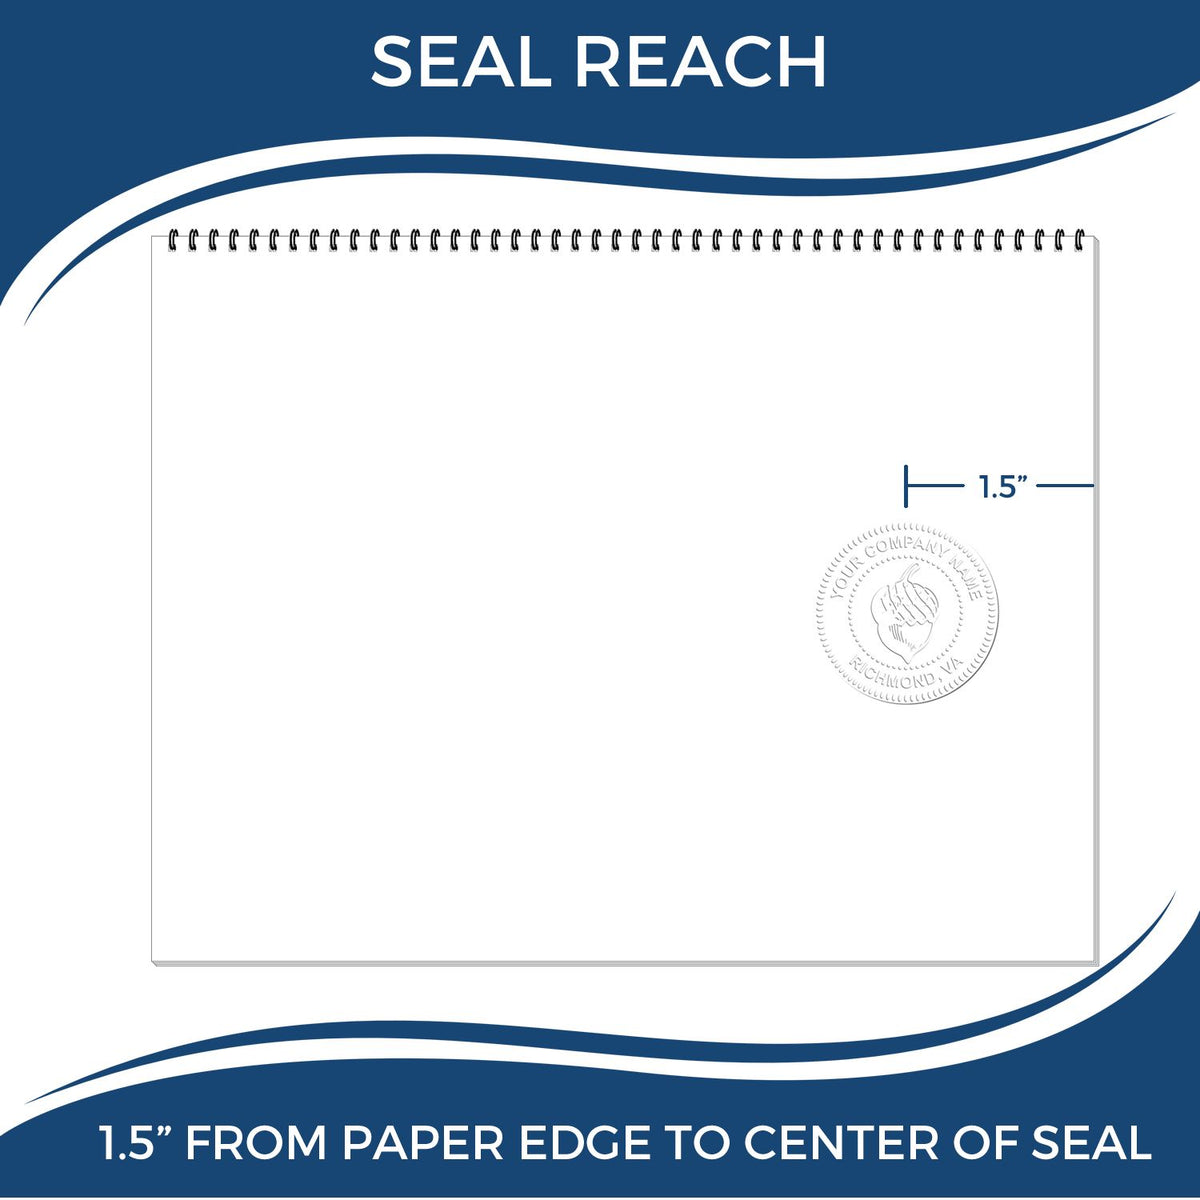 An infographic showing the seal reach which is represented by a ruler and a miniature seal image of the Delaware Desk Architect Embossing Seal